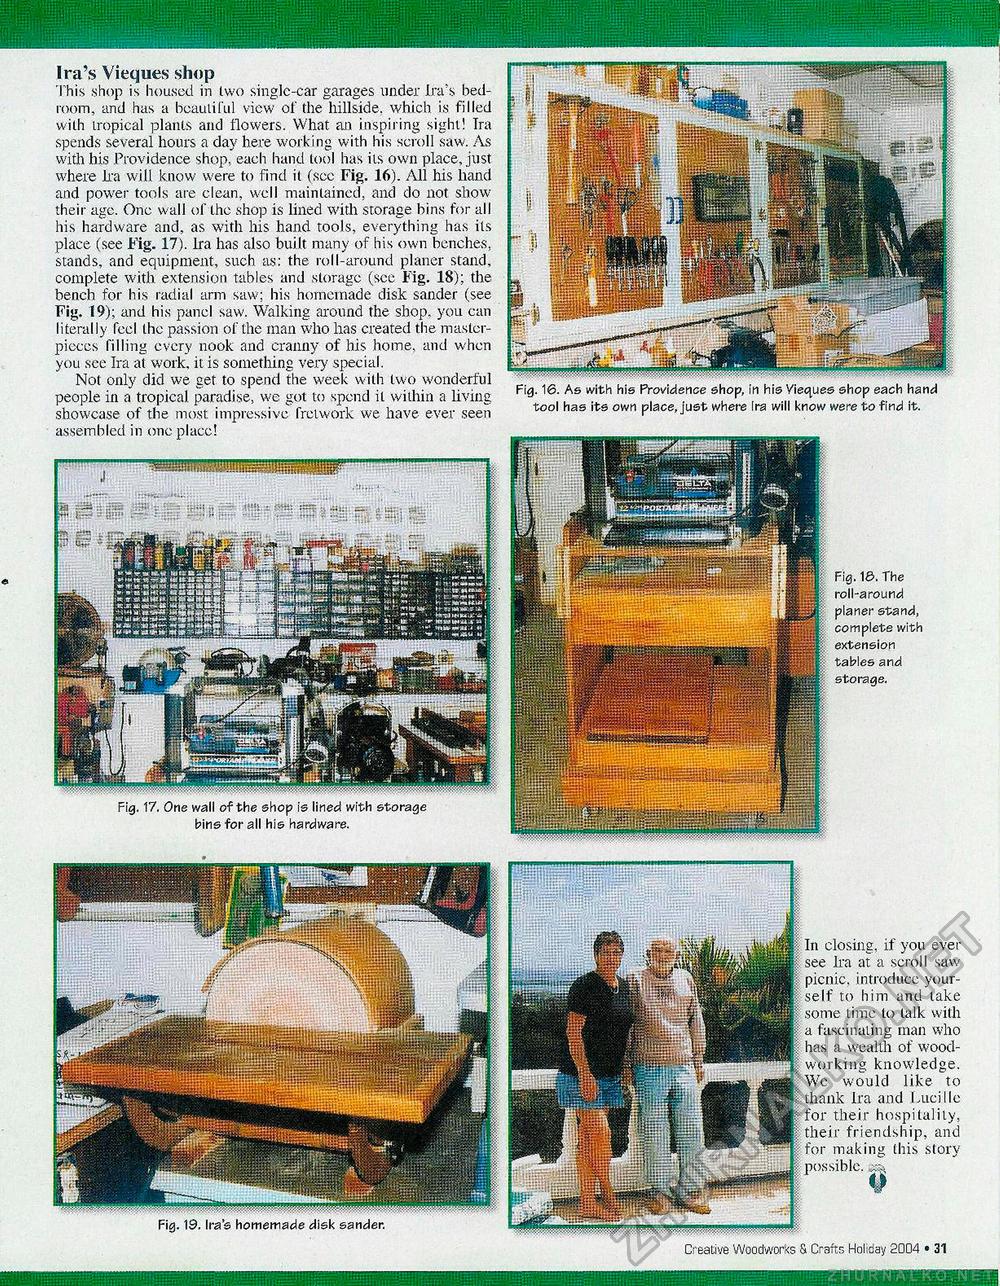 Creative Woodworks  & crafts-103-2004-Holiday,  31